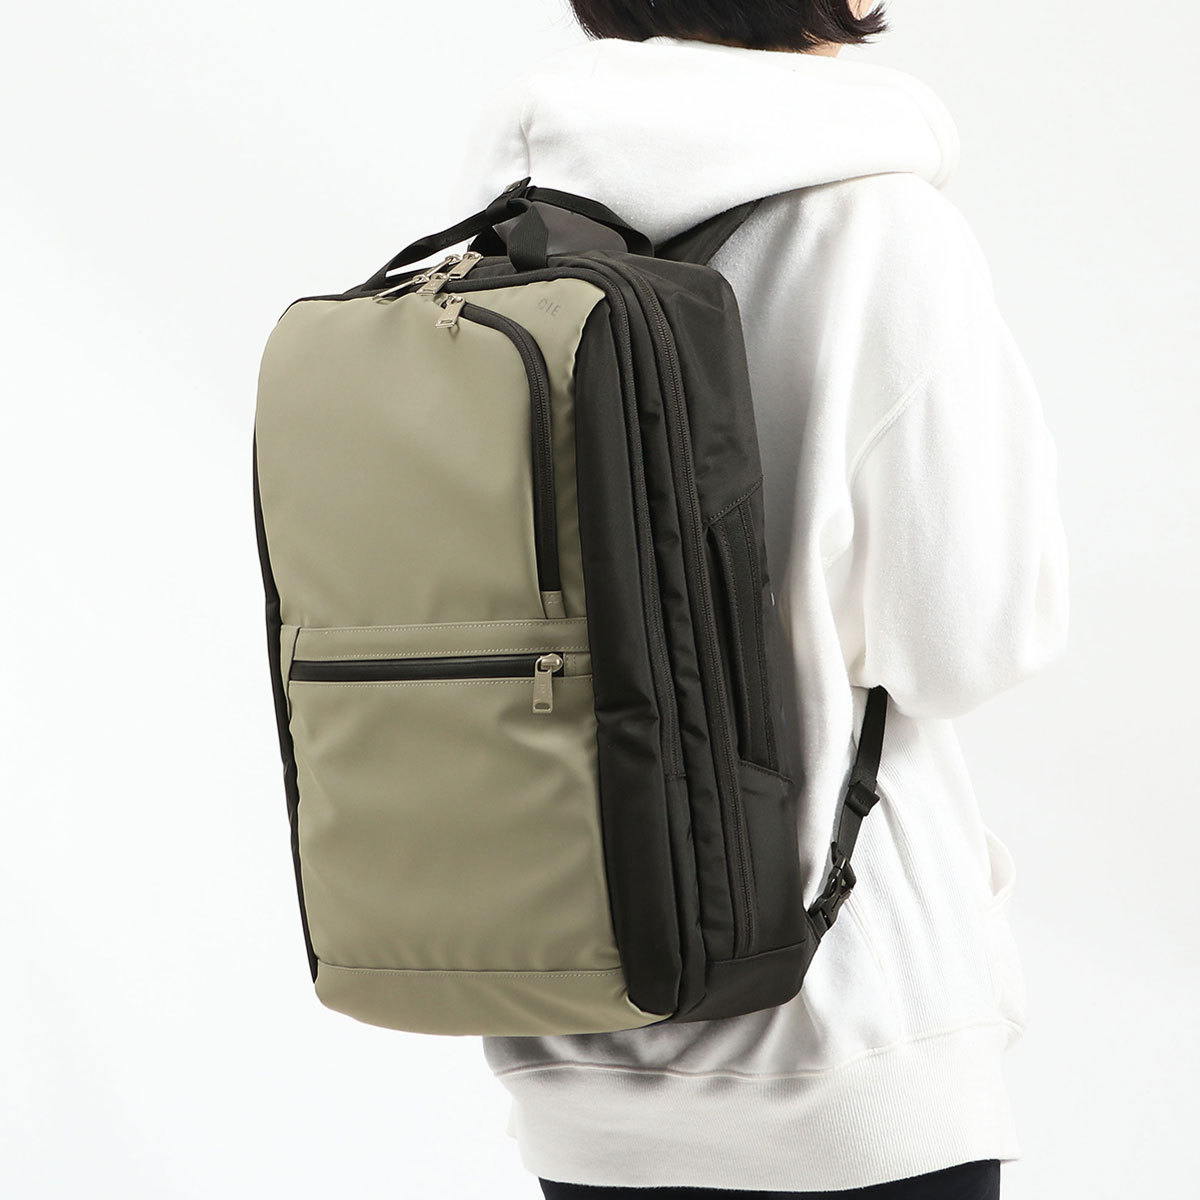 CIE リュック シー VARIOUS 2WAYBACKPACK - L ヴァリアス 2WAY 通学...